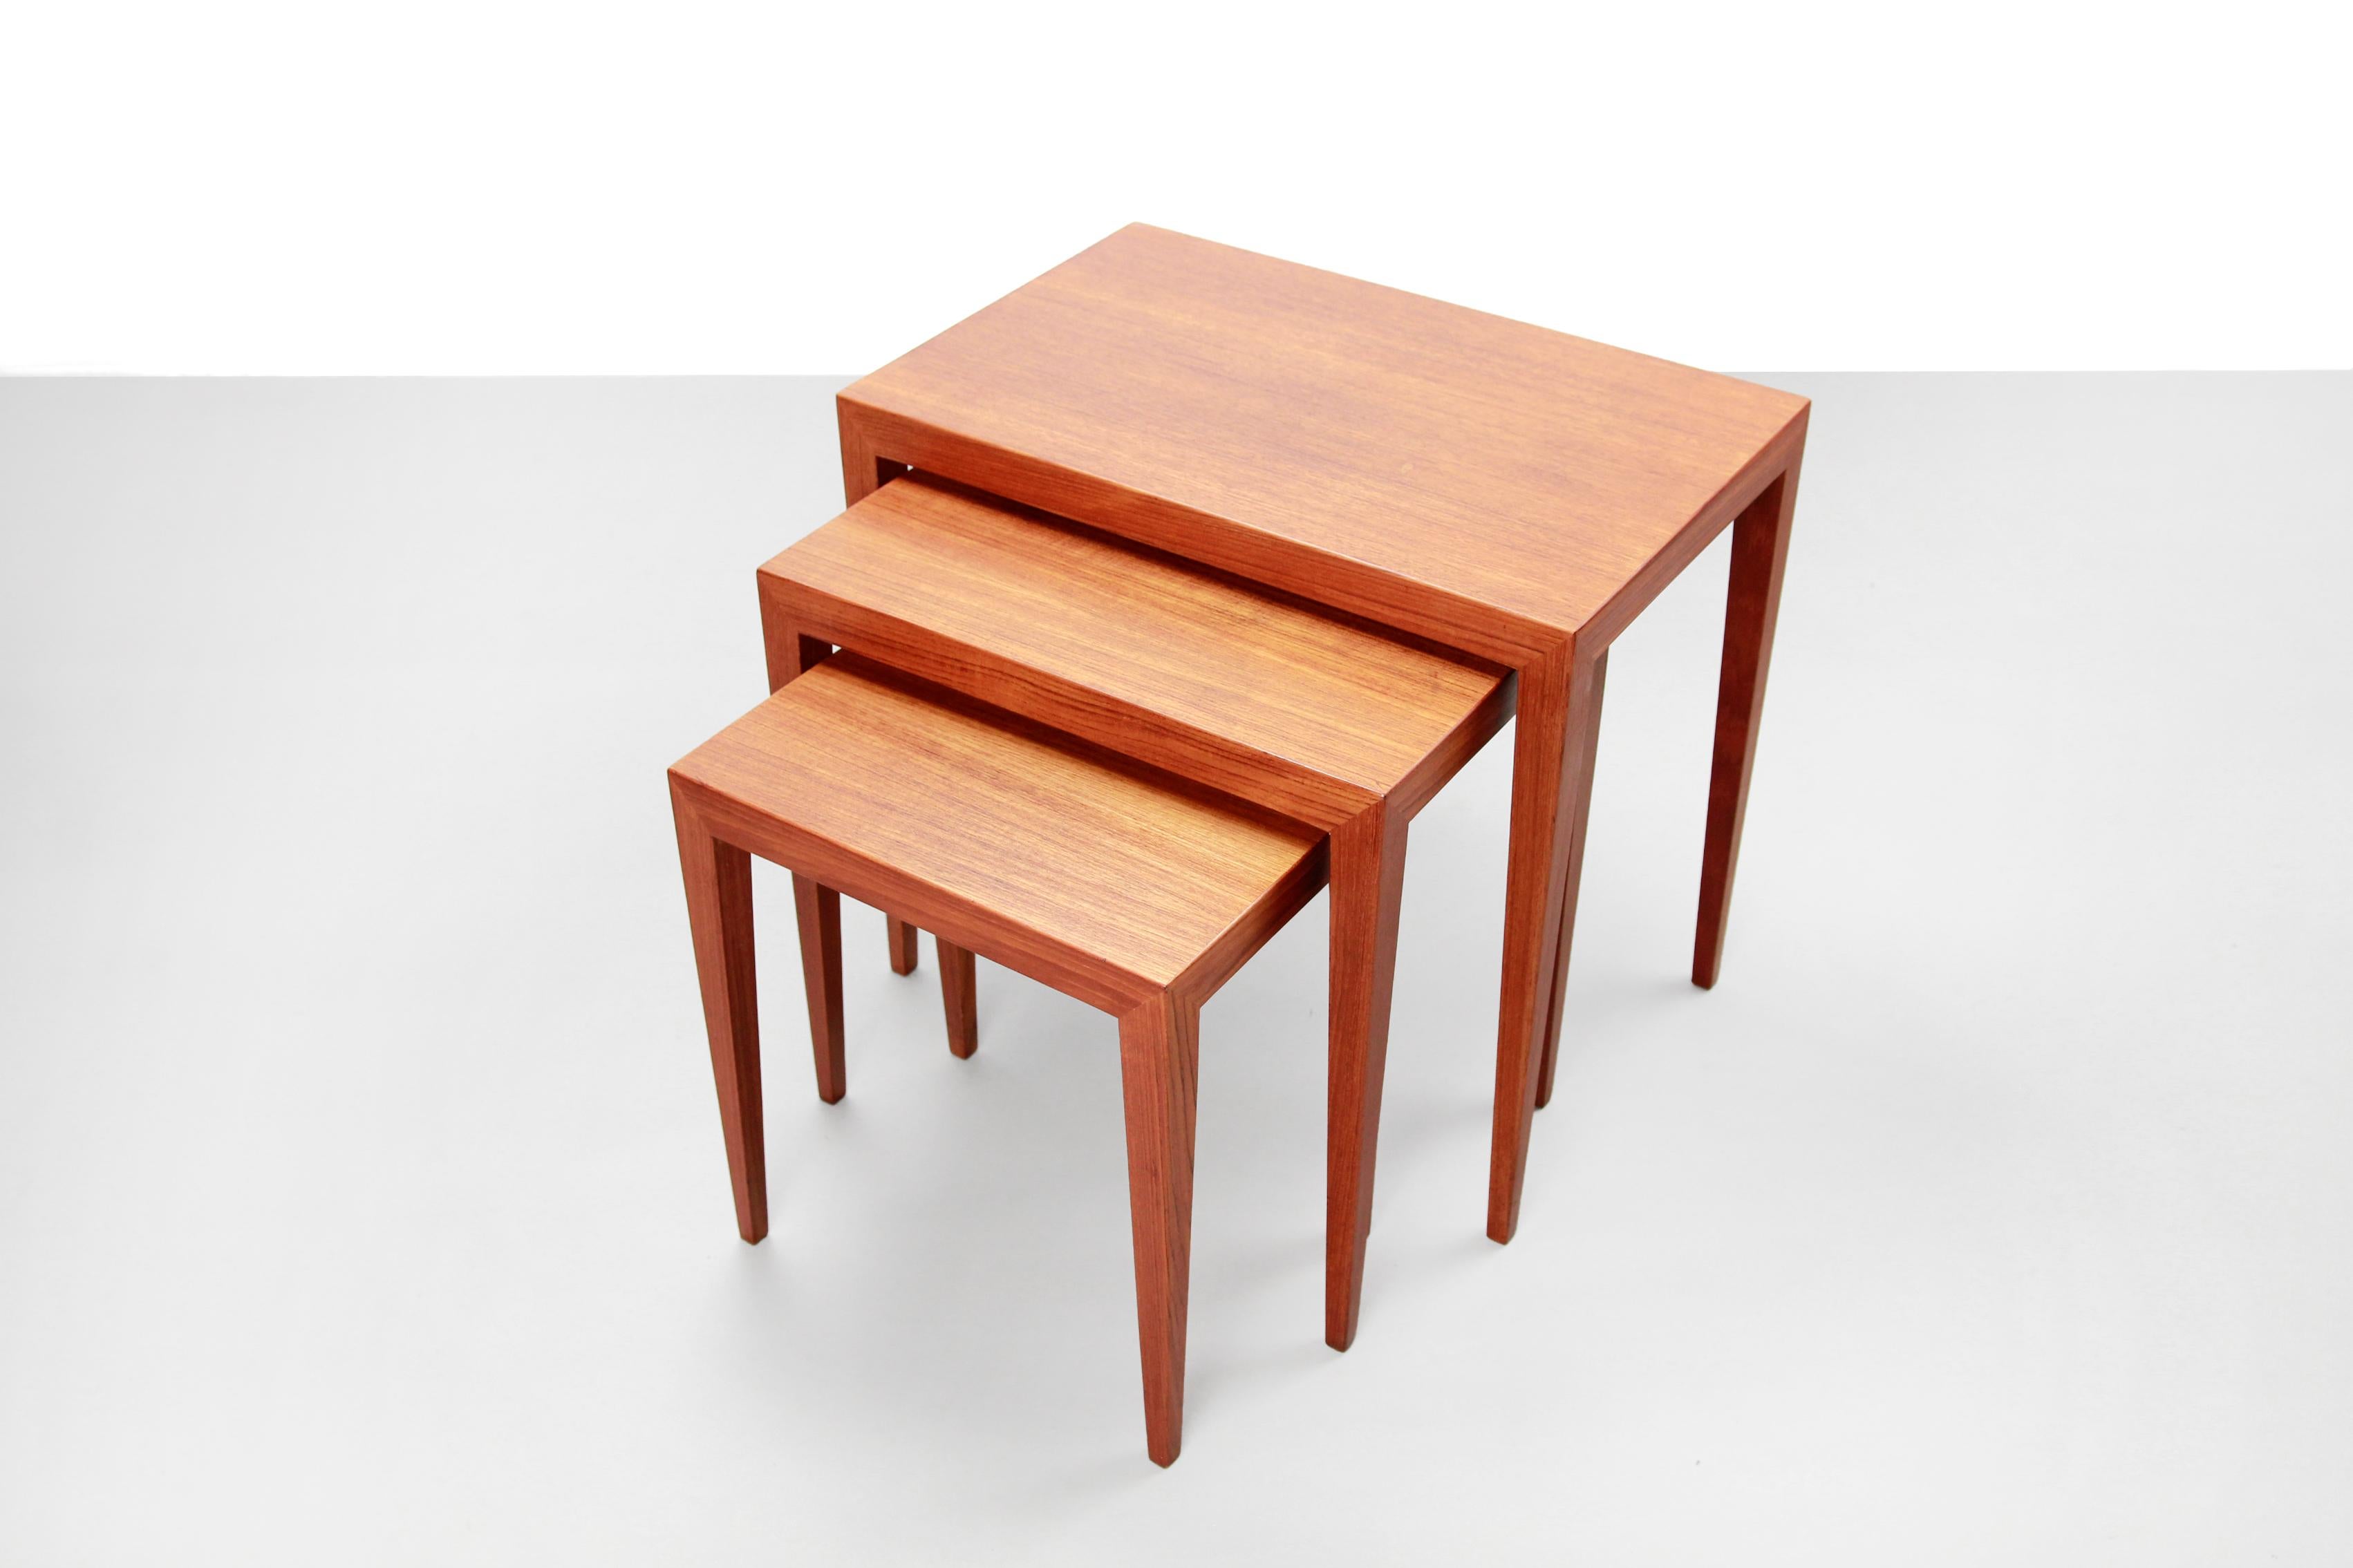 Beautiful set of 3 teak nesting tables designed by Severin Hansen. Well made and with amazing details. Great Danish design and a unique set. All the tables are restored and are in superb condition.